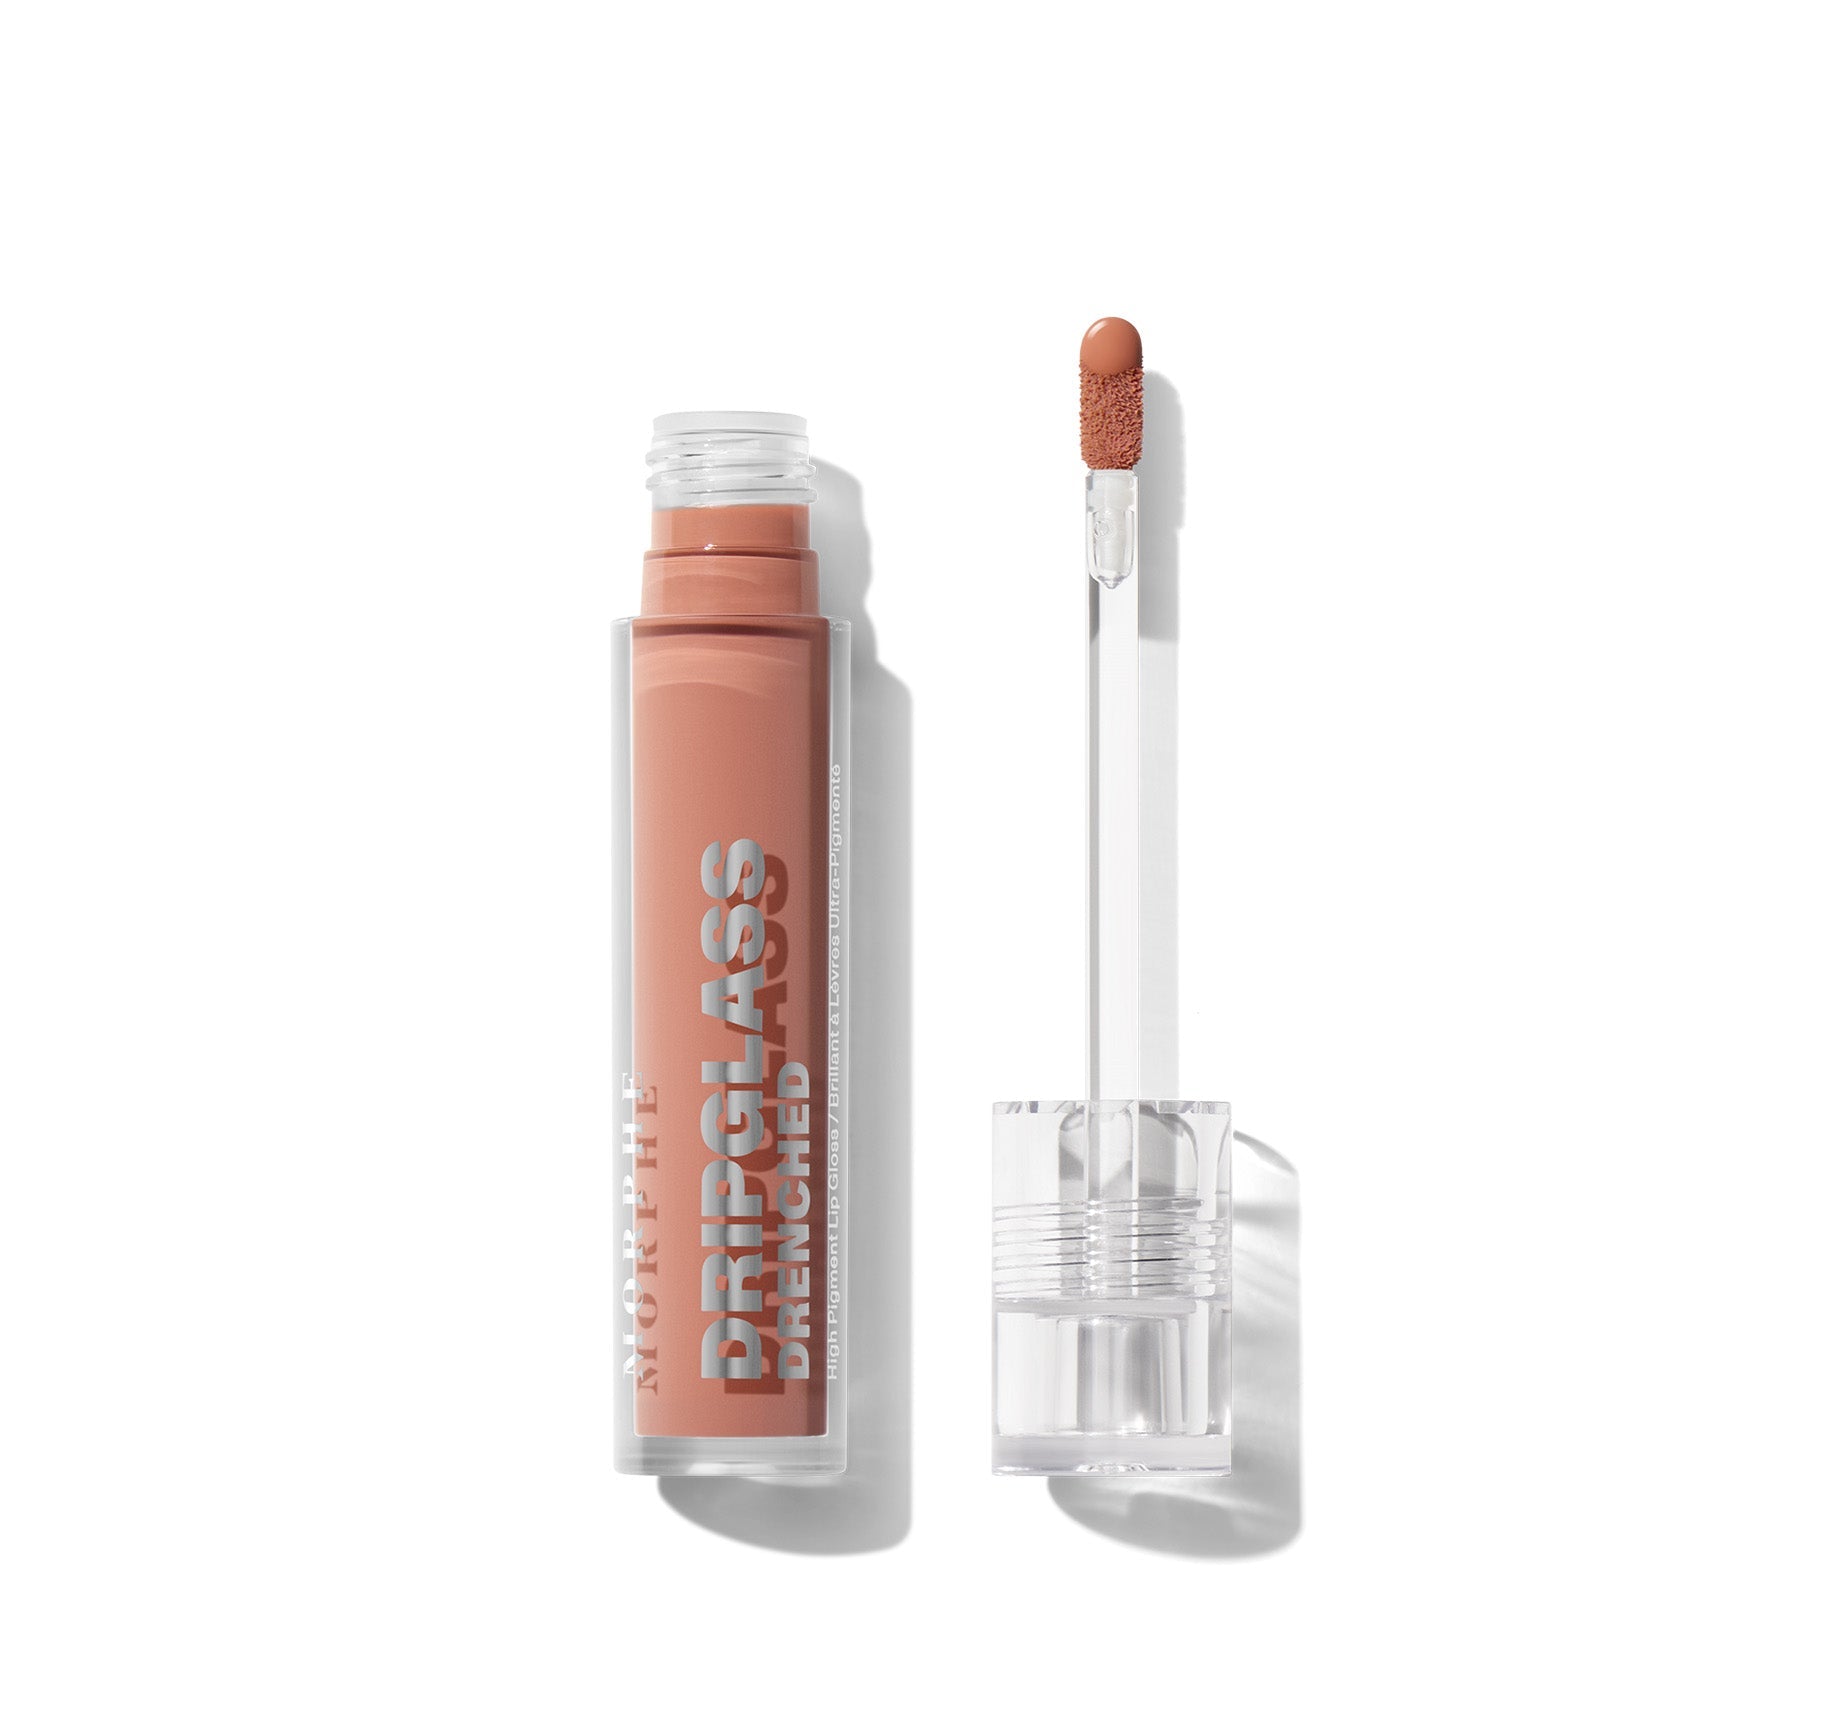 Dripglass Drenched High Pigment Lip Gloss - Naked Dip - Image 1